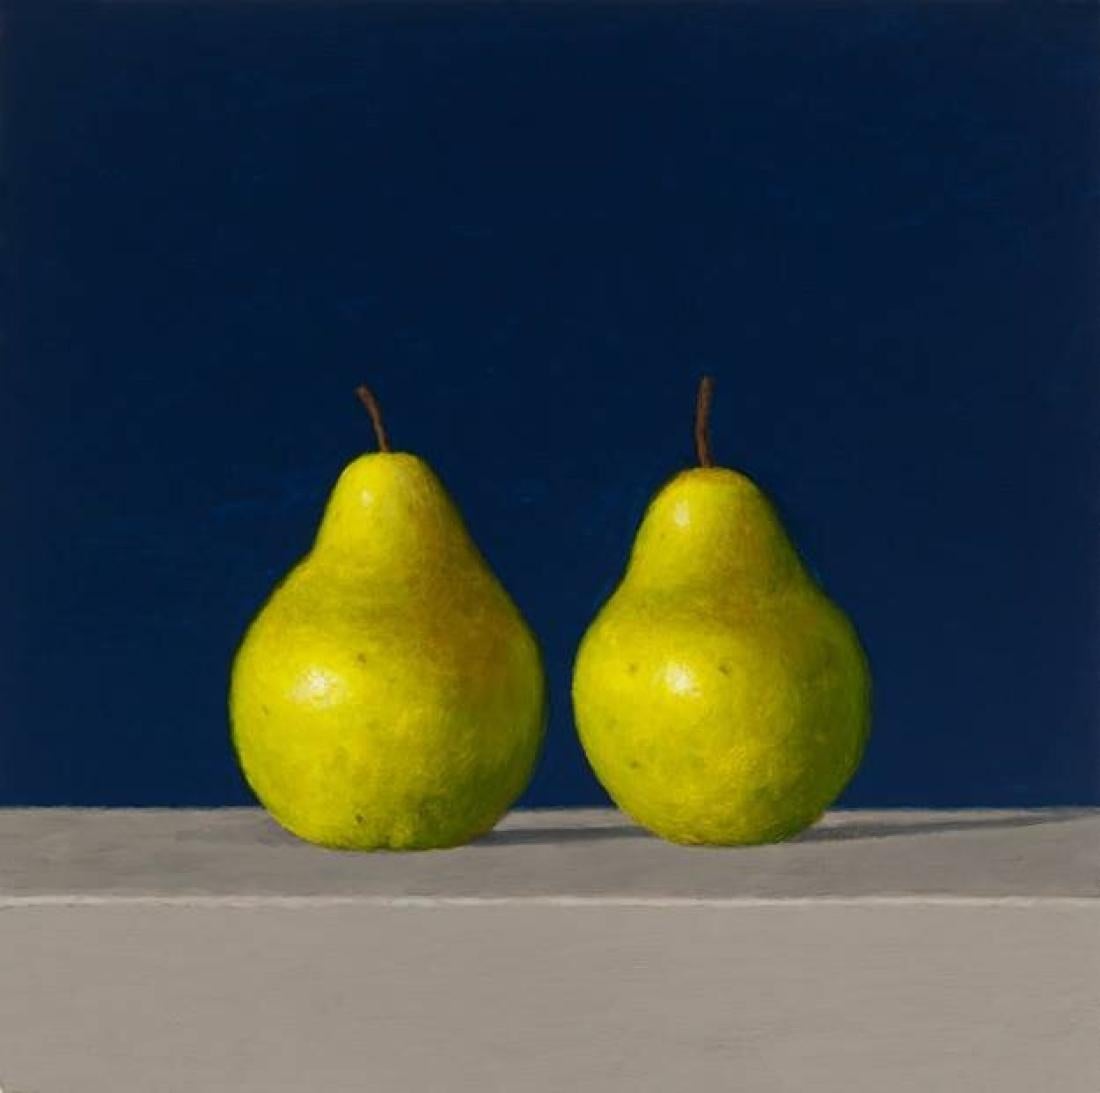  Two Pears, oil painting, American Realism, Still-life, Small painting,Realist